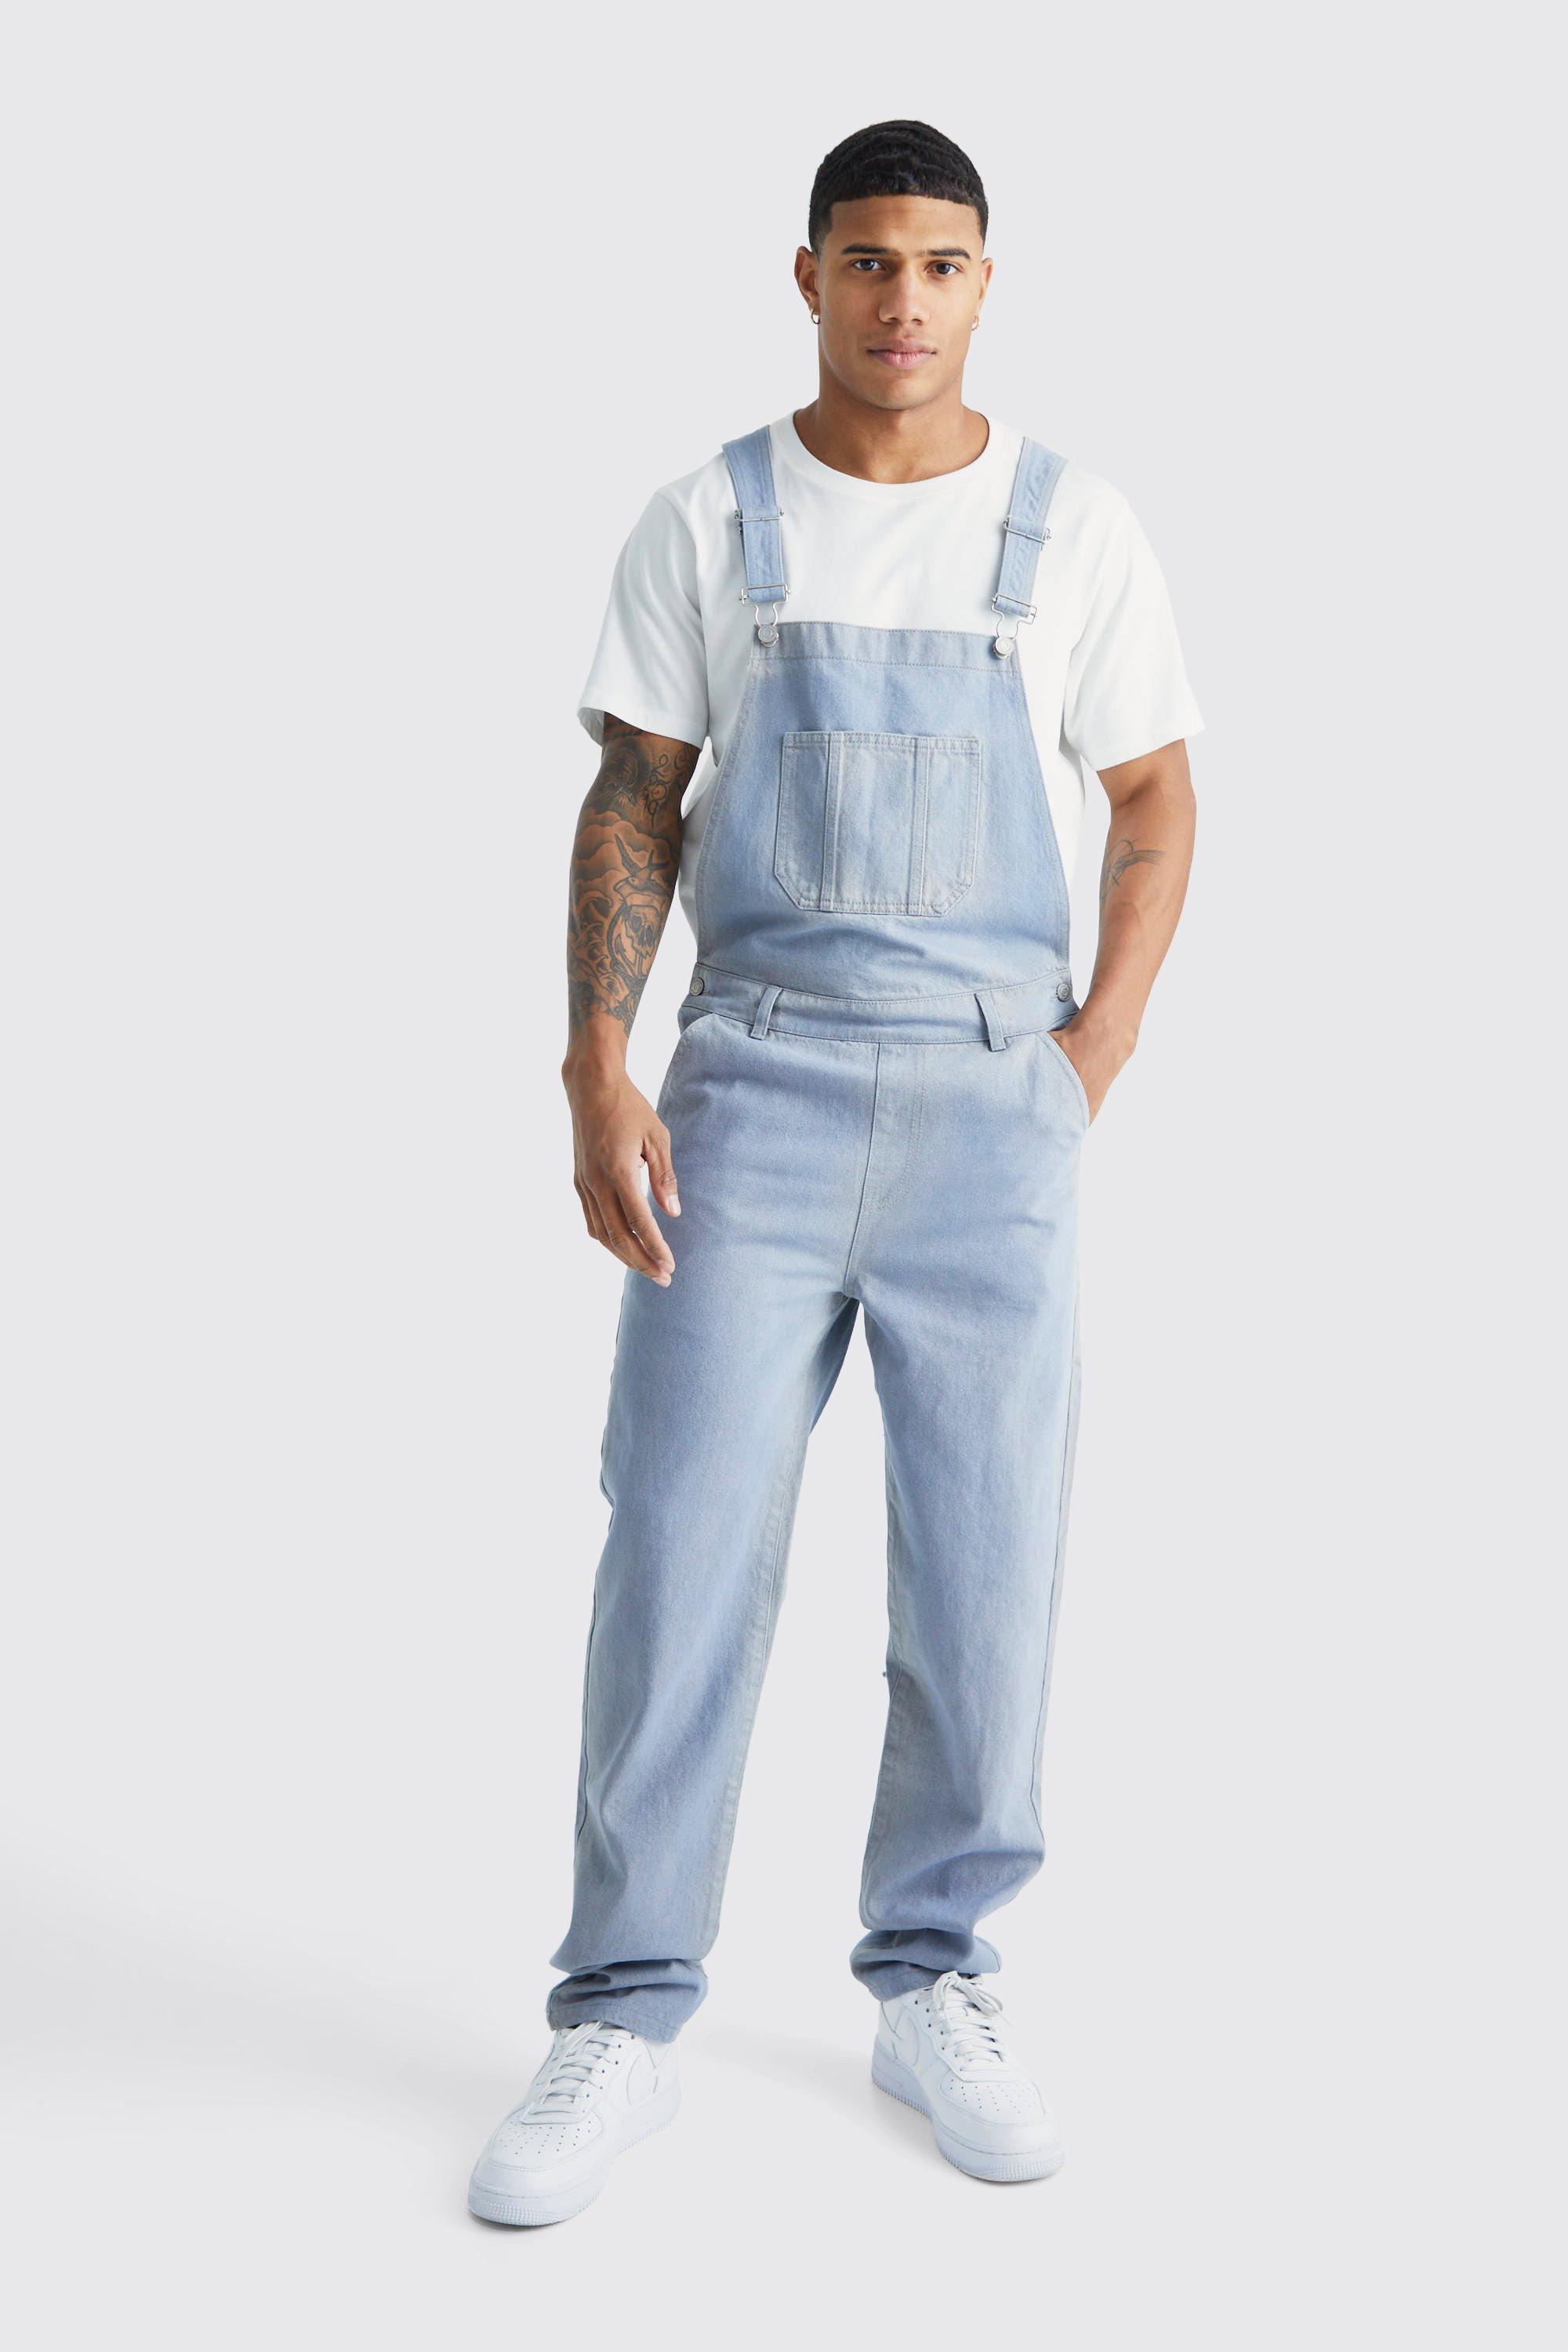 Men’s Vintage Pants, Trousers, Jeans, Overalls Mens Relaxed Washed Illusion Dungaree - Grey - M $90.00 AT vintagedancer.com